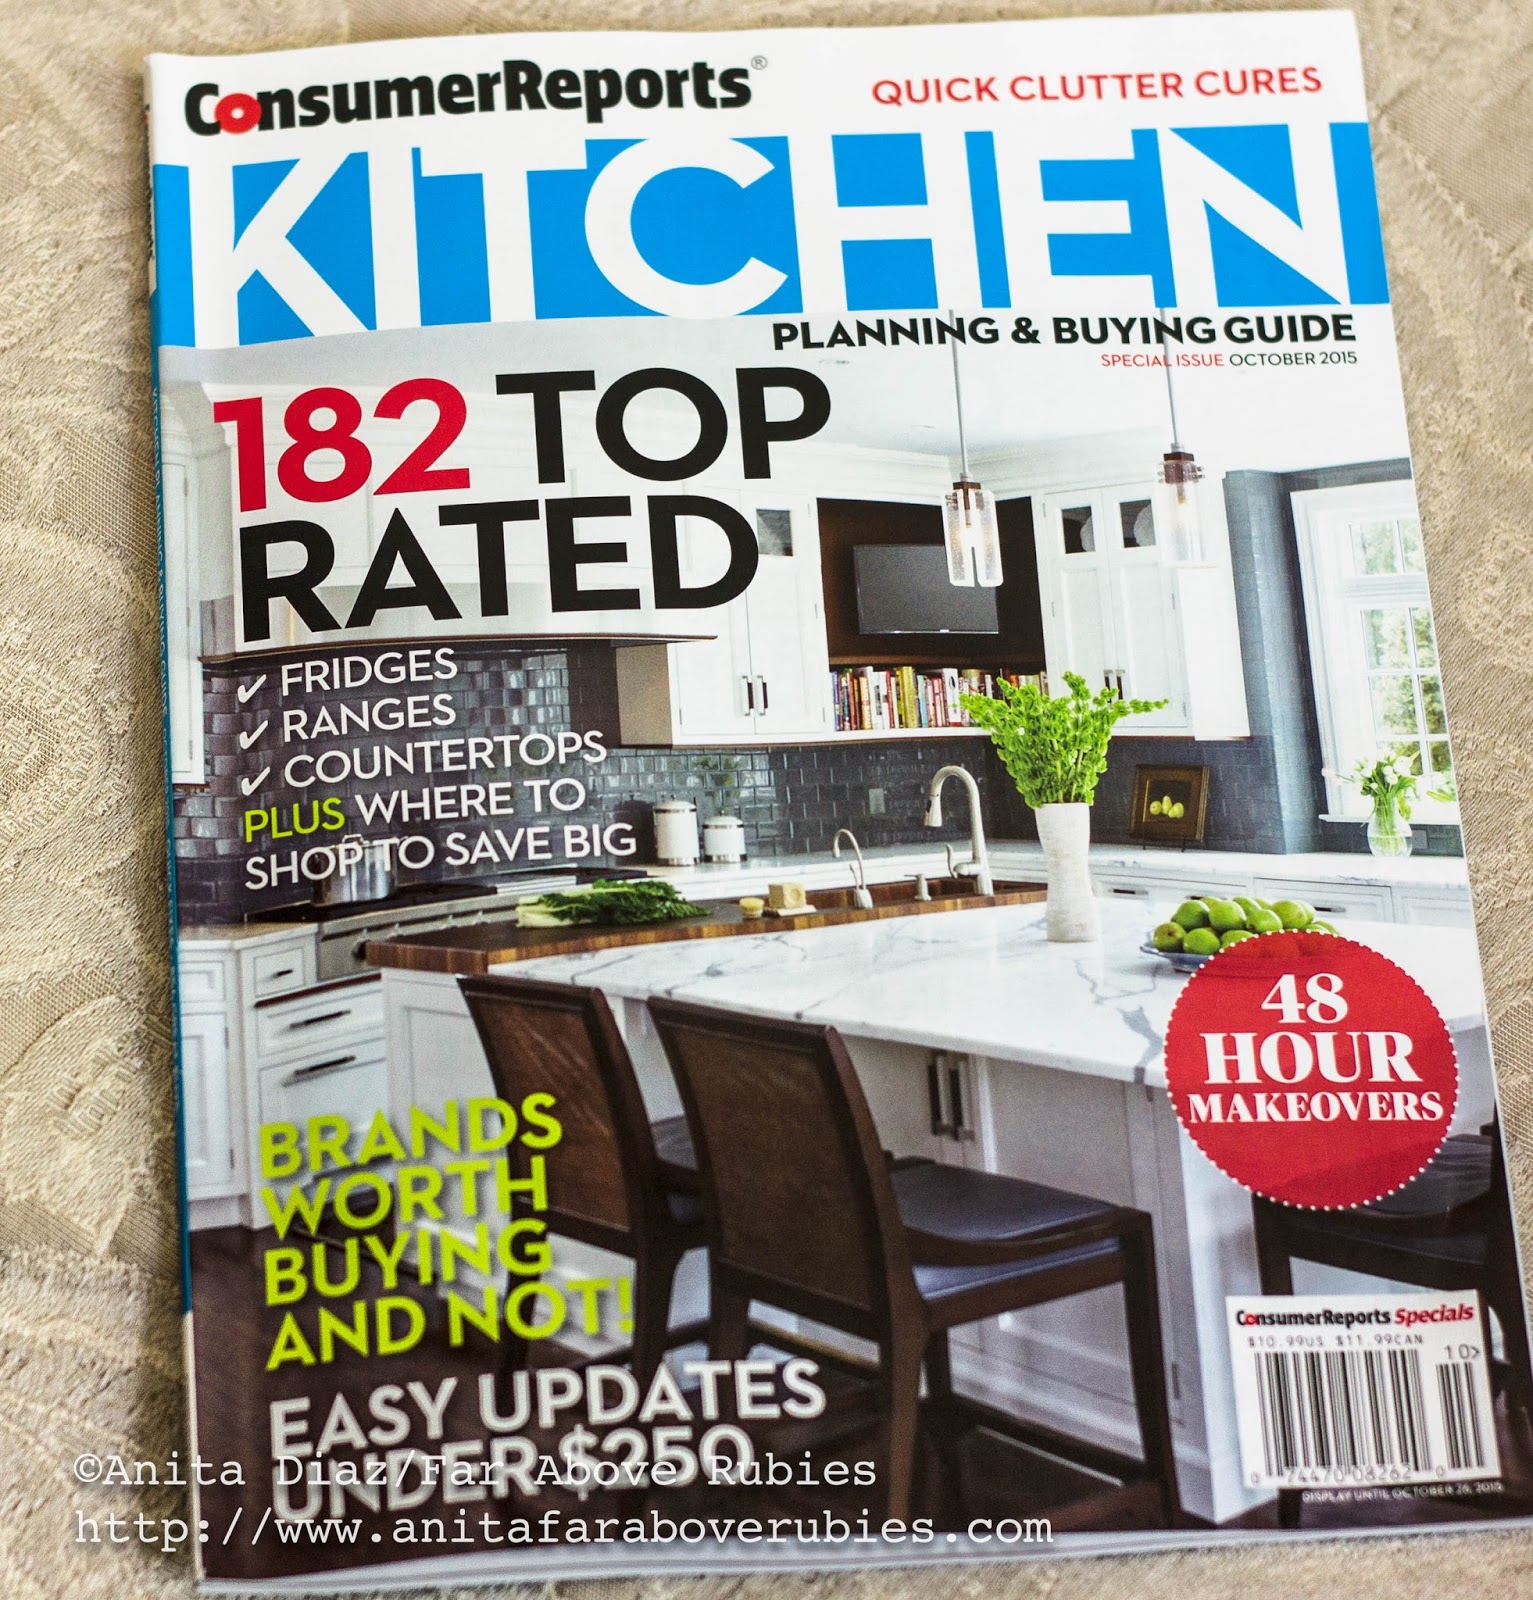 Consumer Reports Kitchen feature